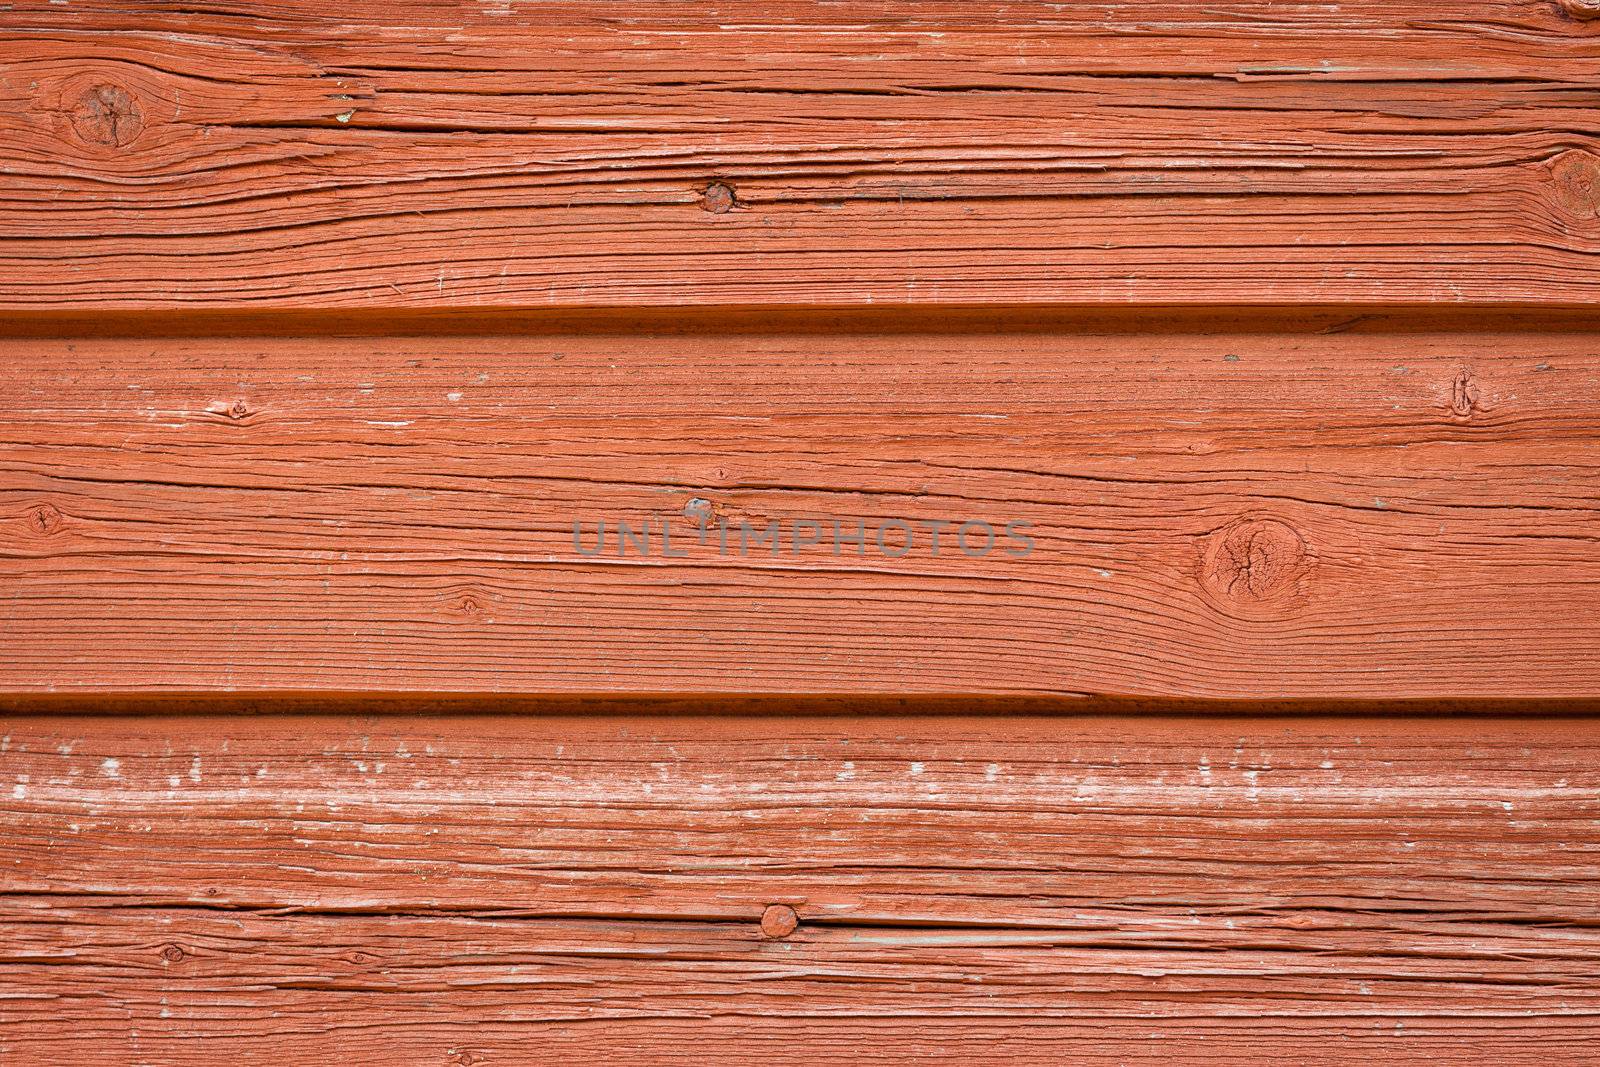 Red wooden background by Jaykayl